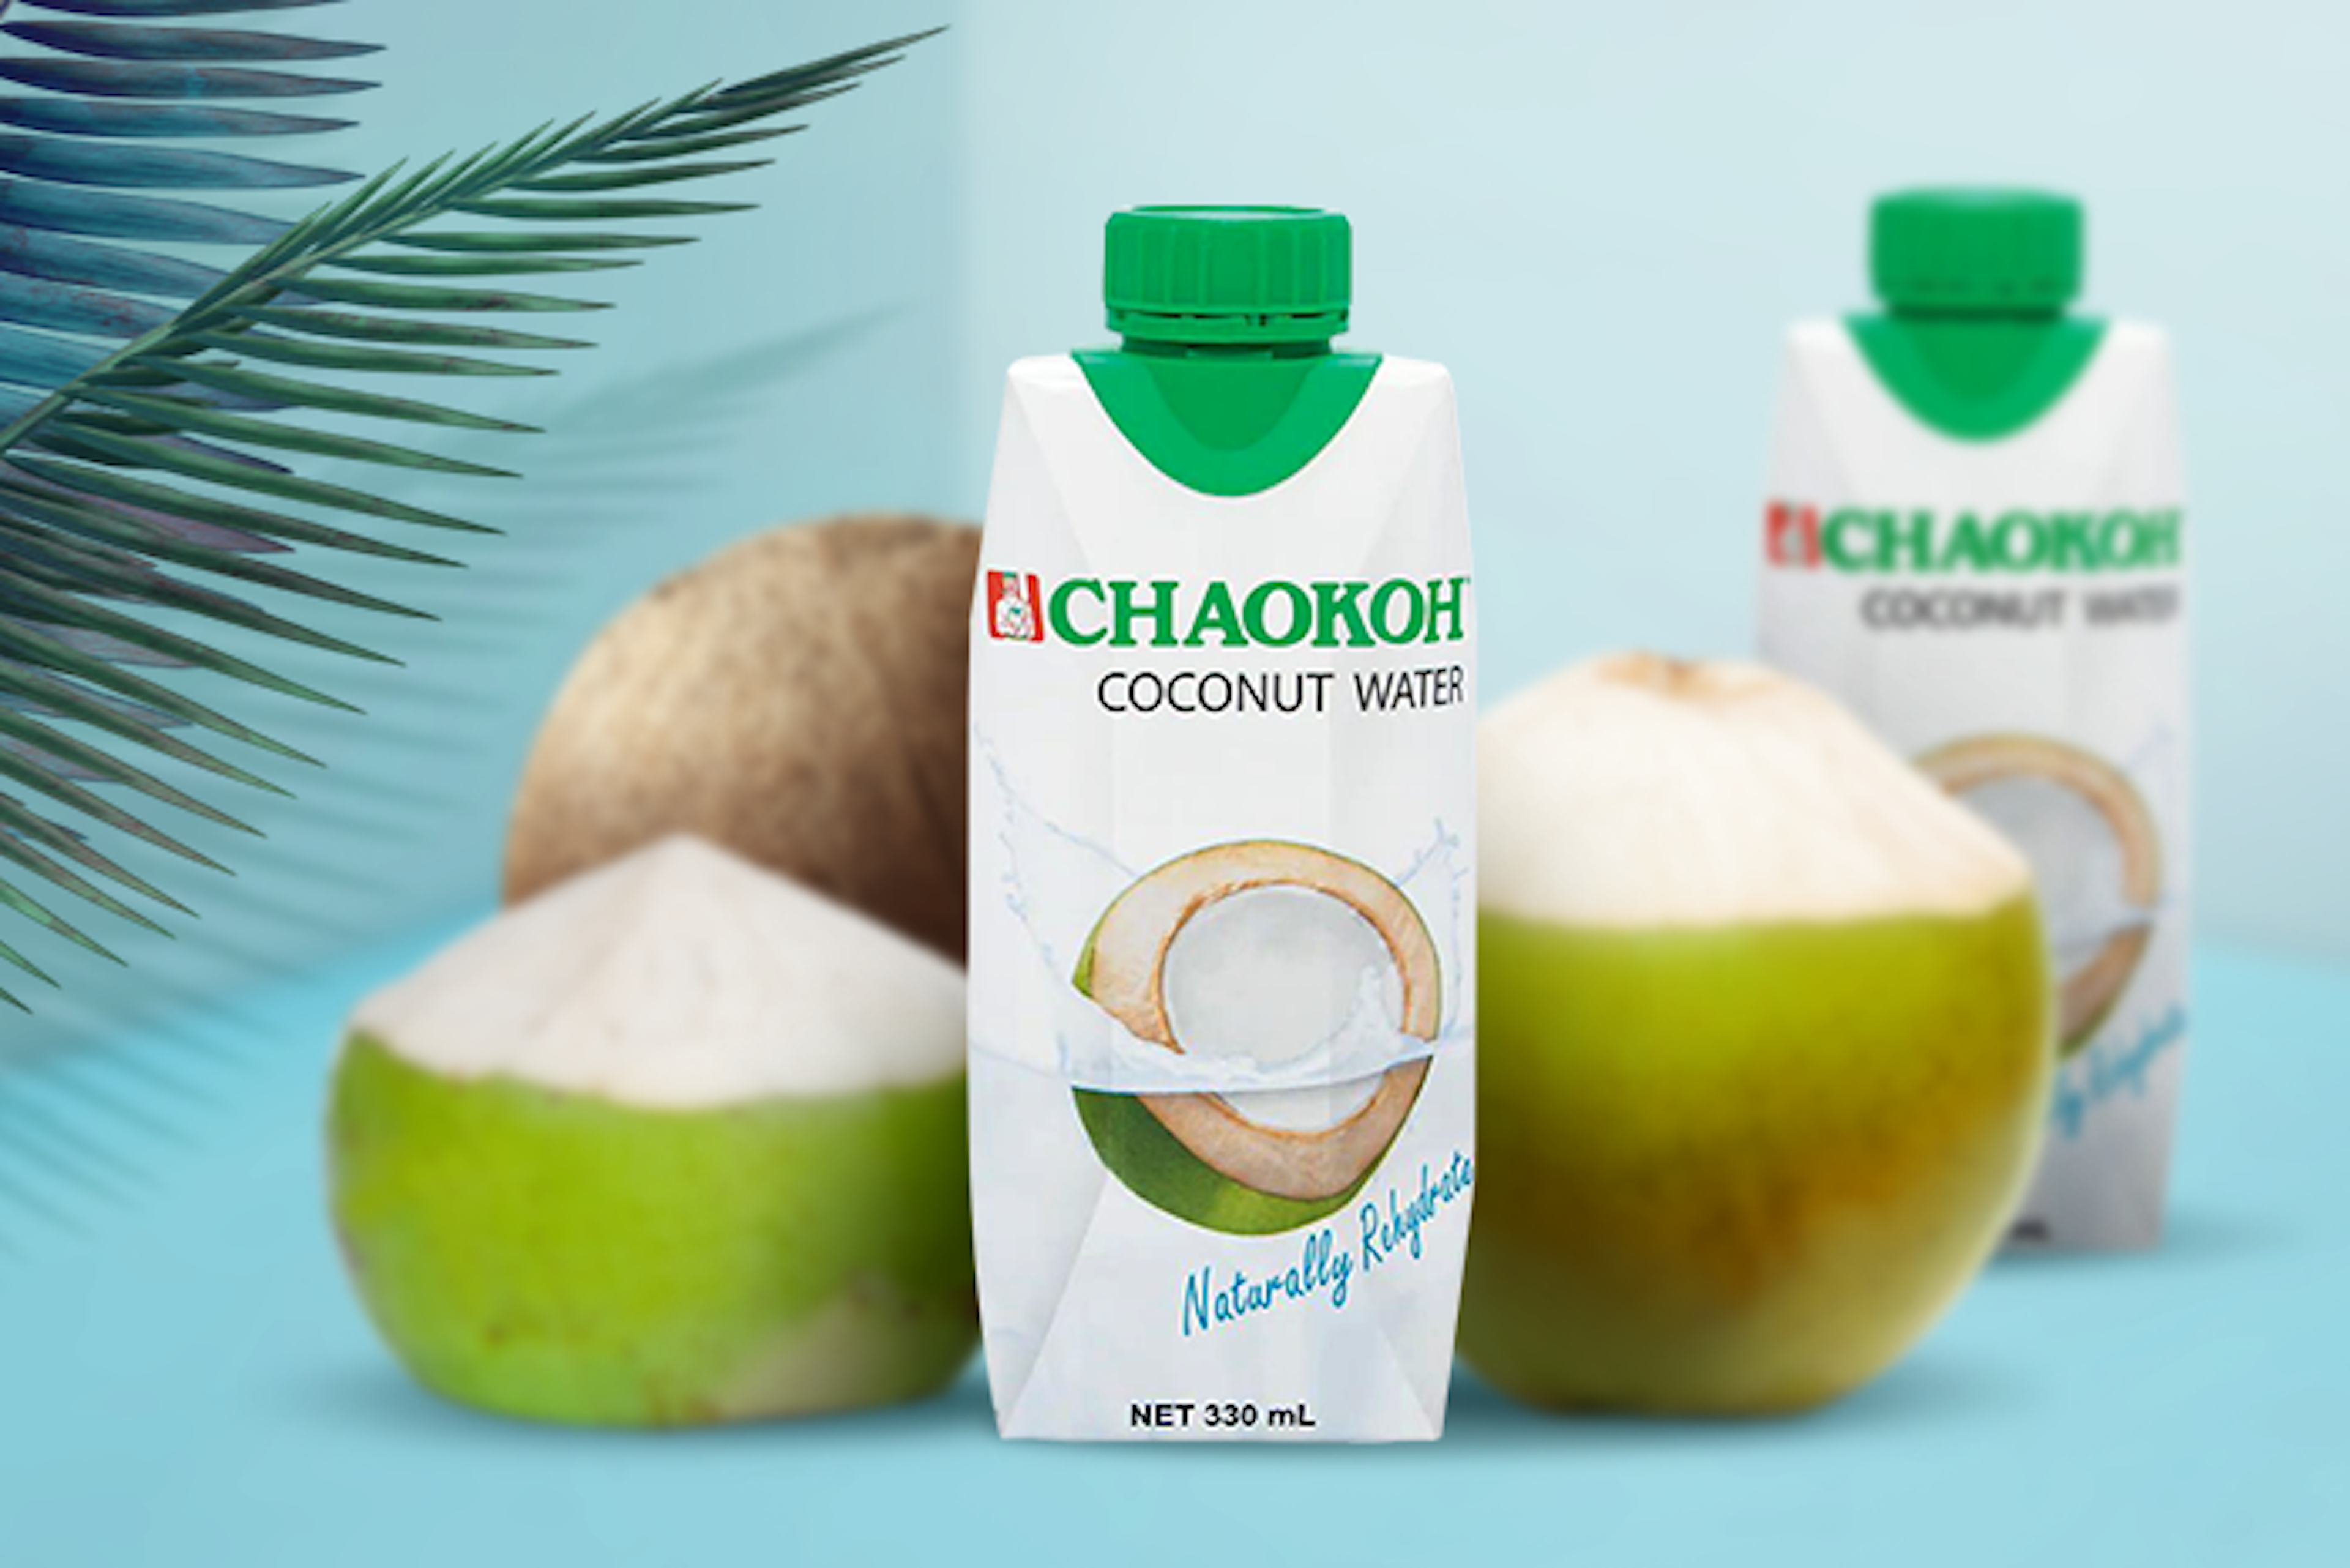 Chaokoh Coconut Water 330ml - Naturally Refreshing Drink